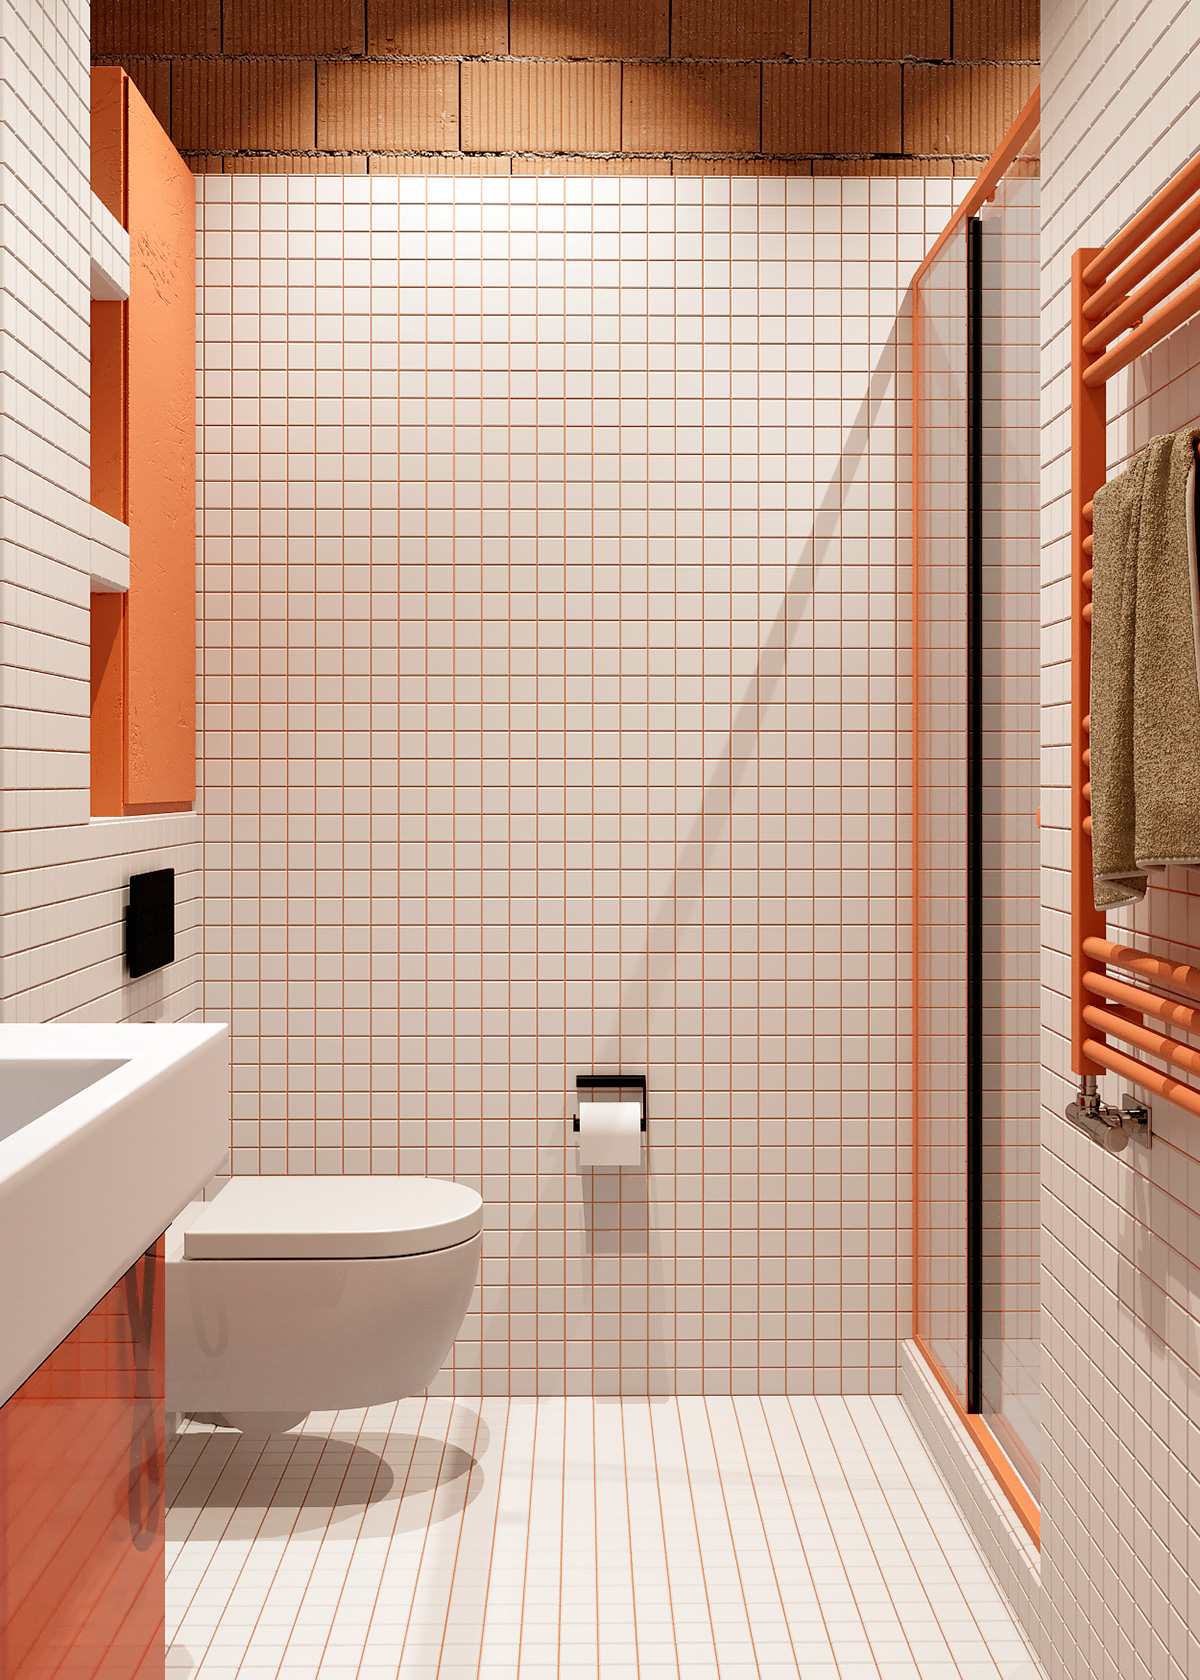 This bathroom completely brings the atmosphere of the entire apartment into it, with the main color tone being white and red-orange.